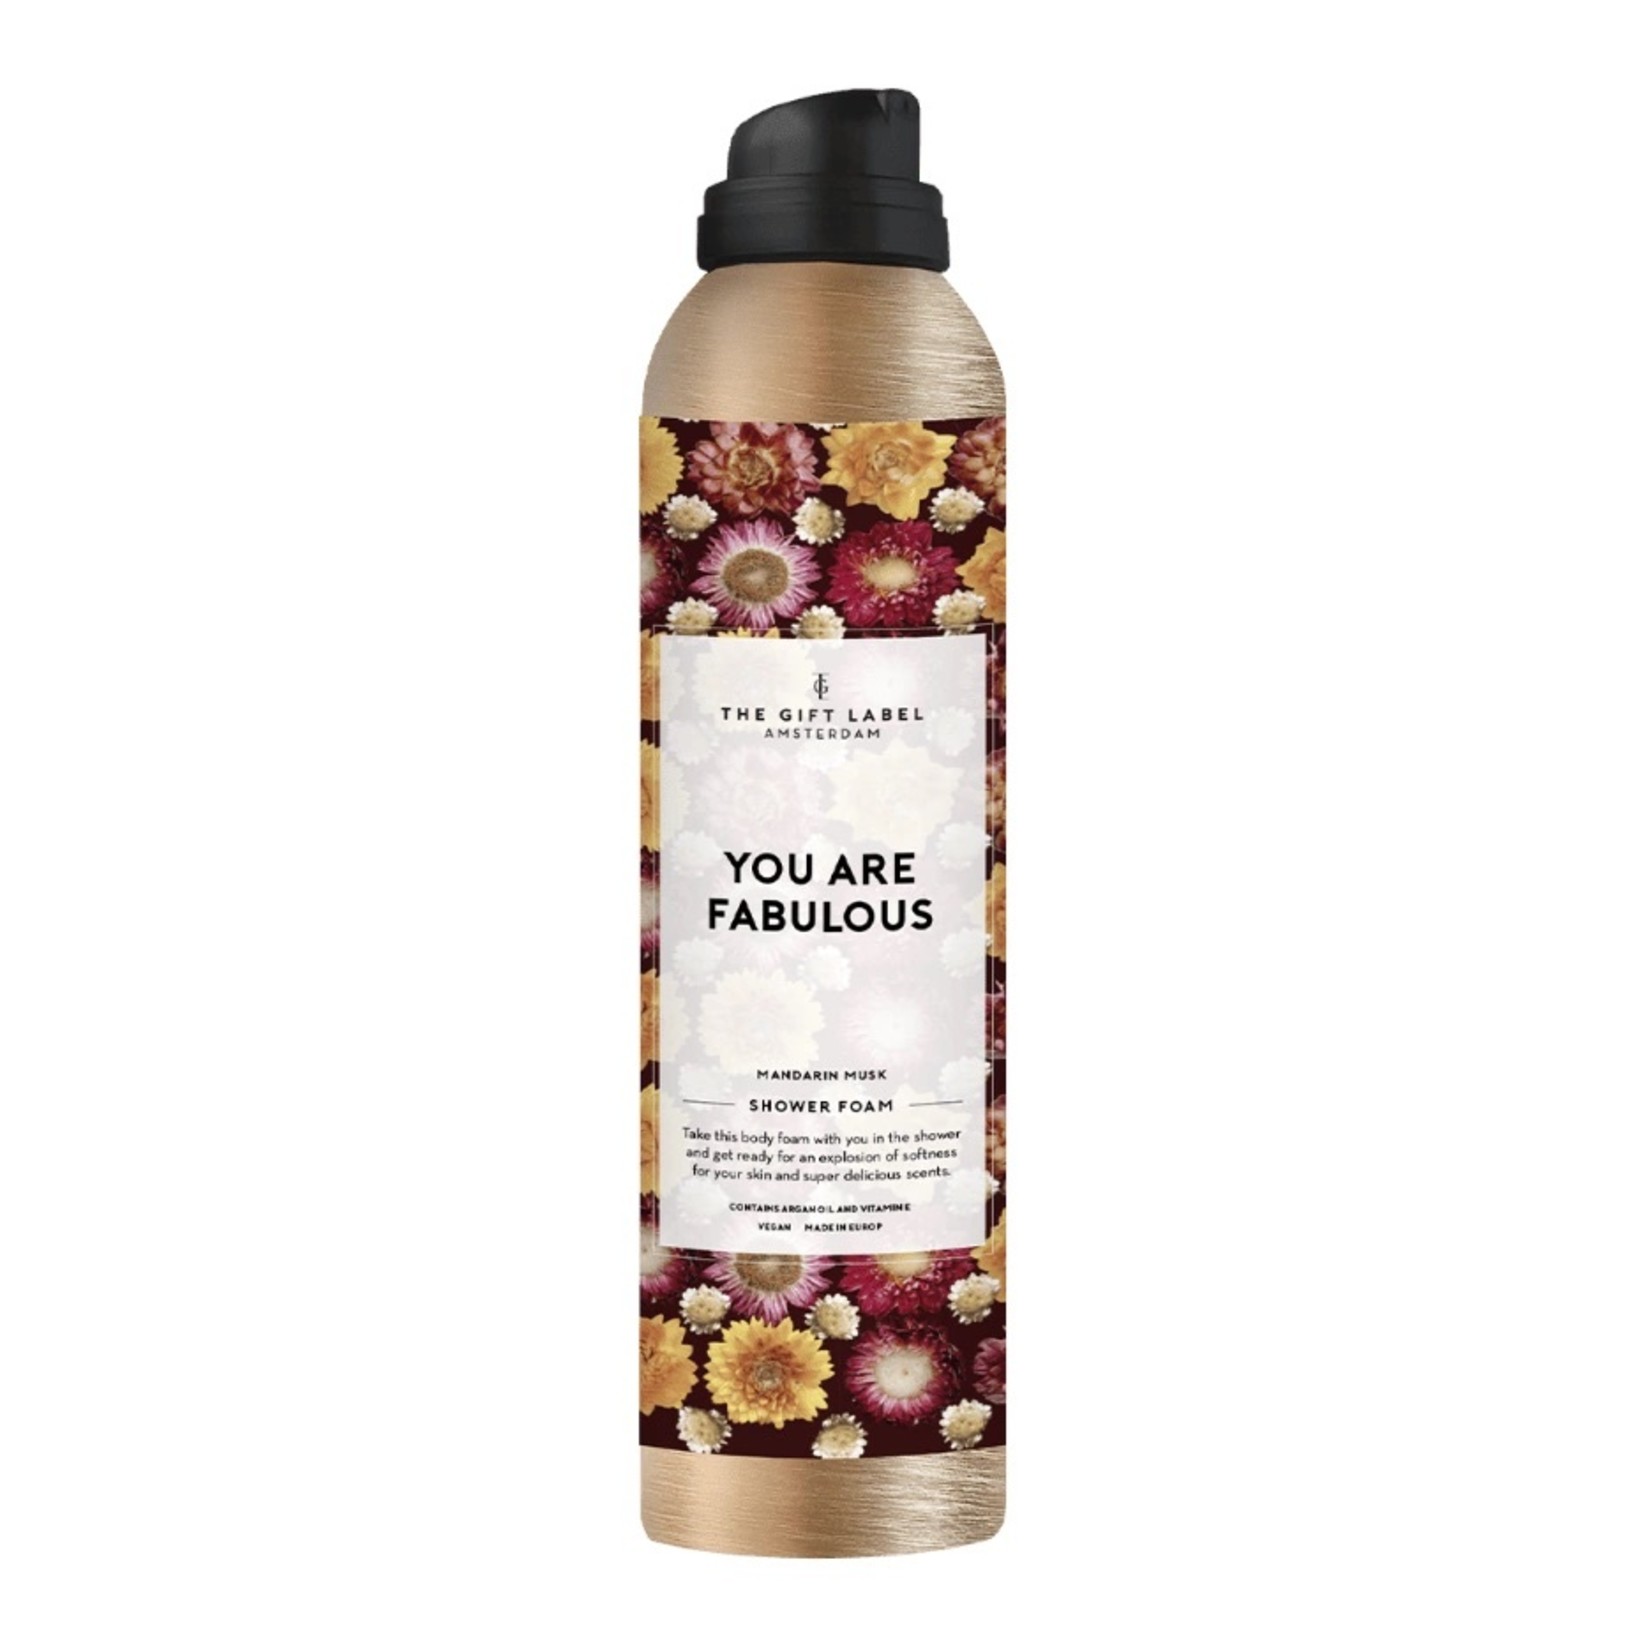 THE GIFT LABEL SHOWER FOAM YOU ARE FABULOUS